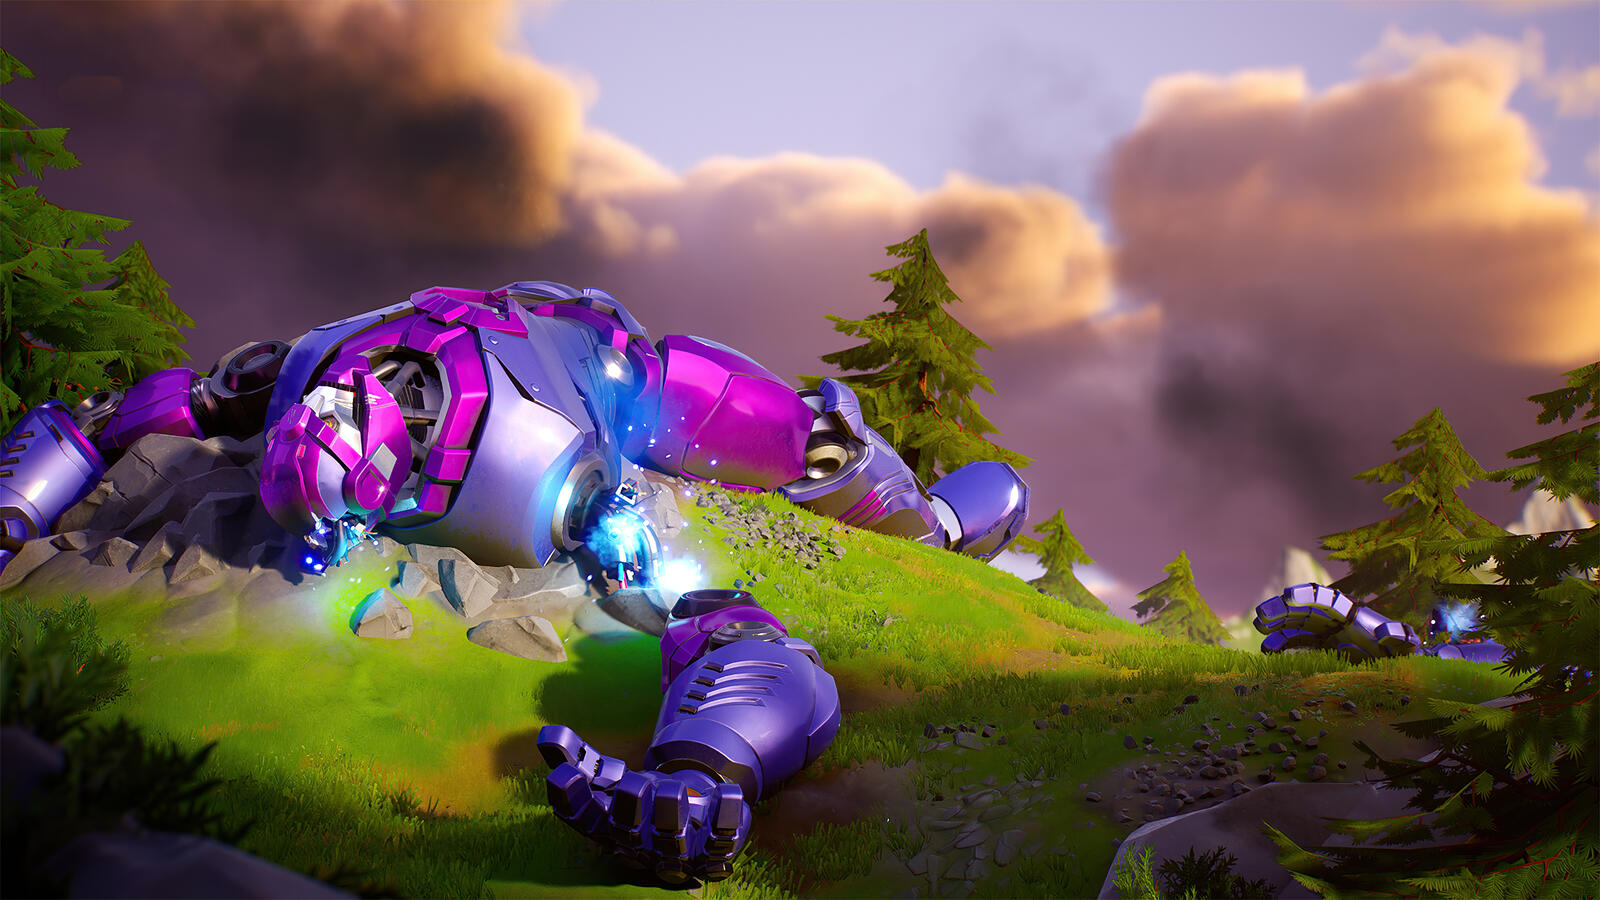 Wallpapers Fortnite soldiers grass on the desktop